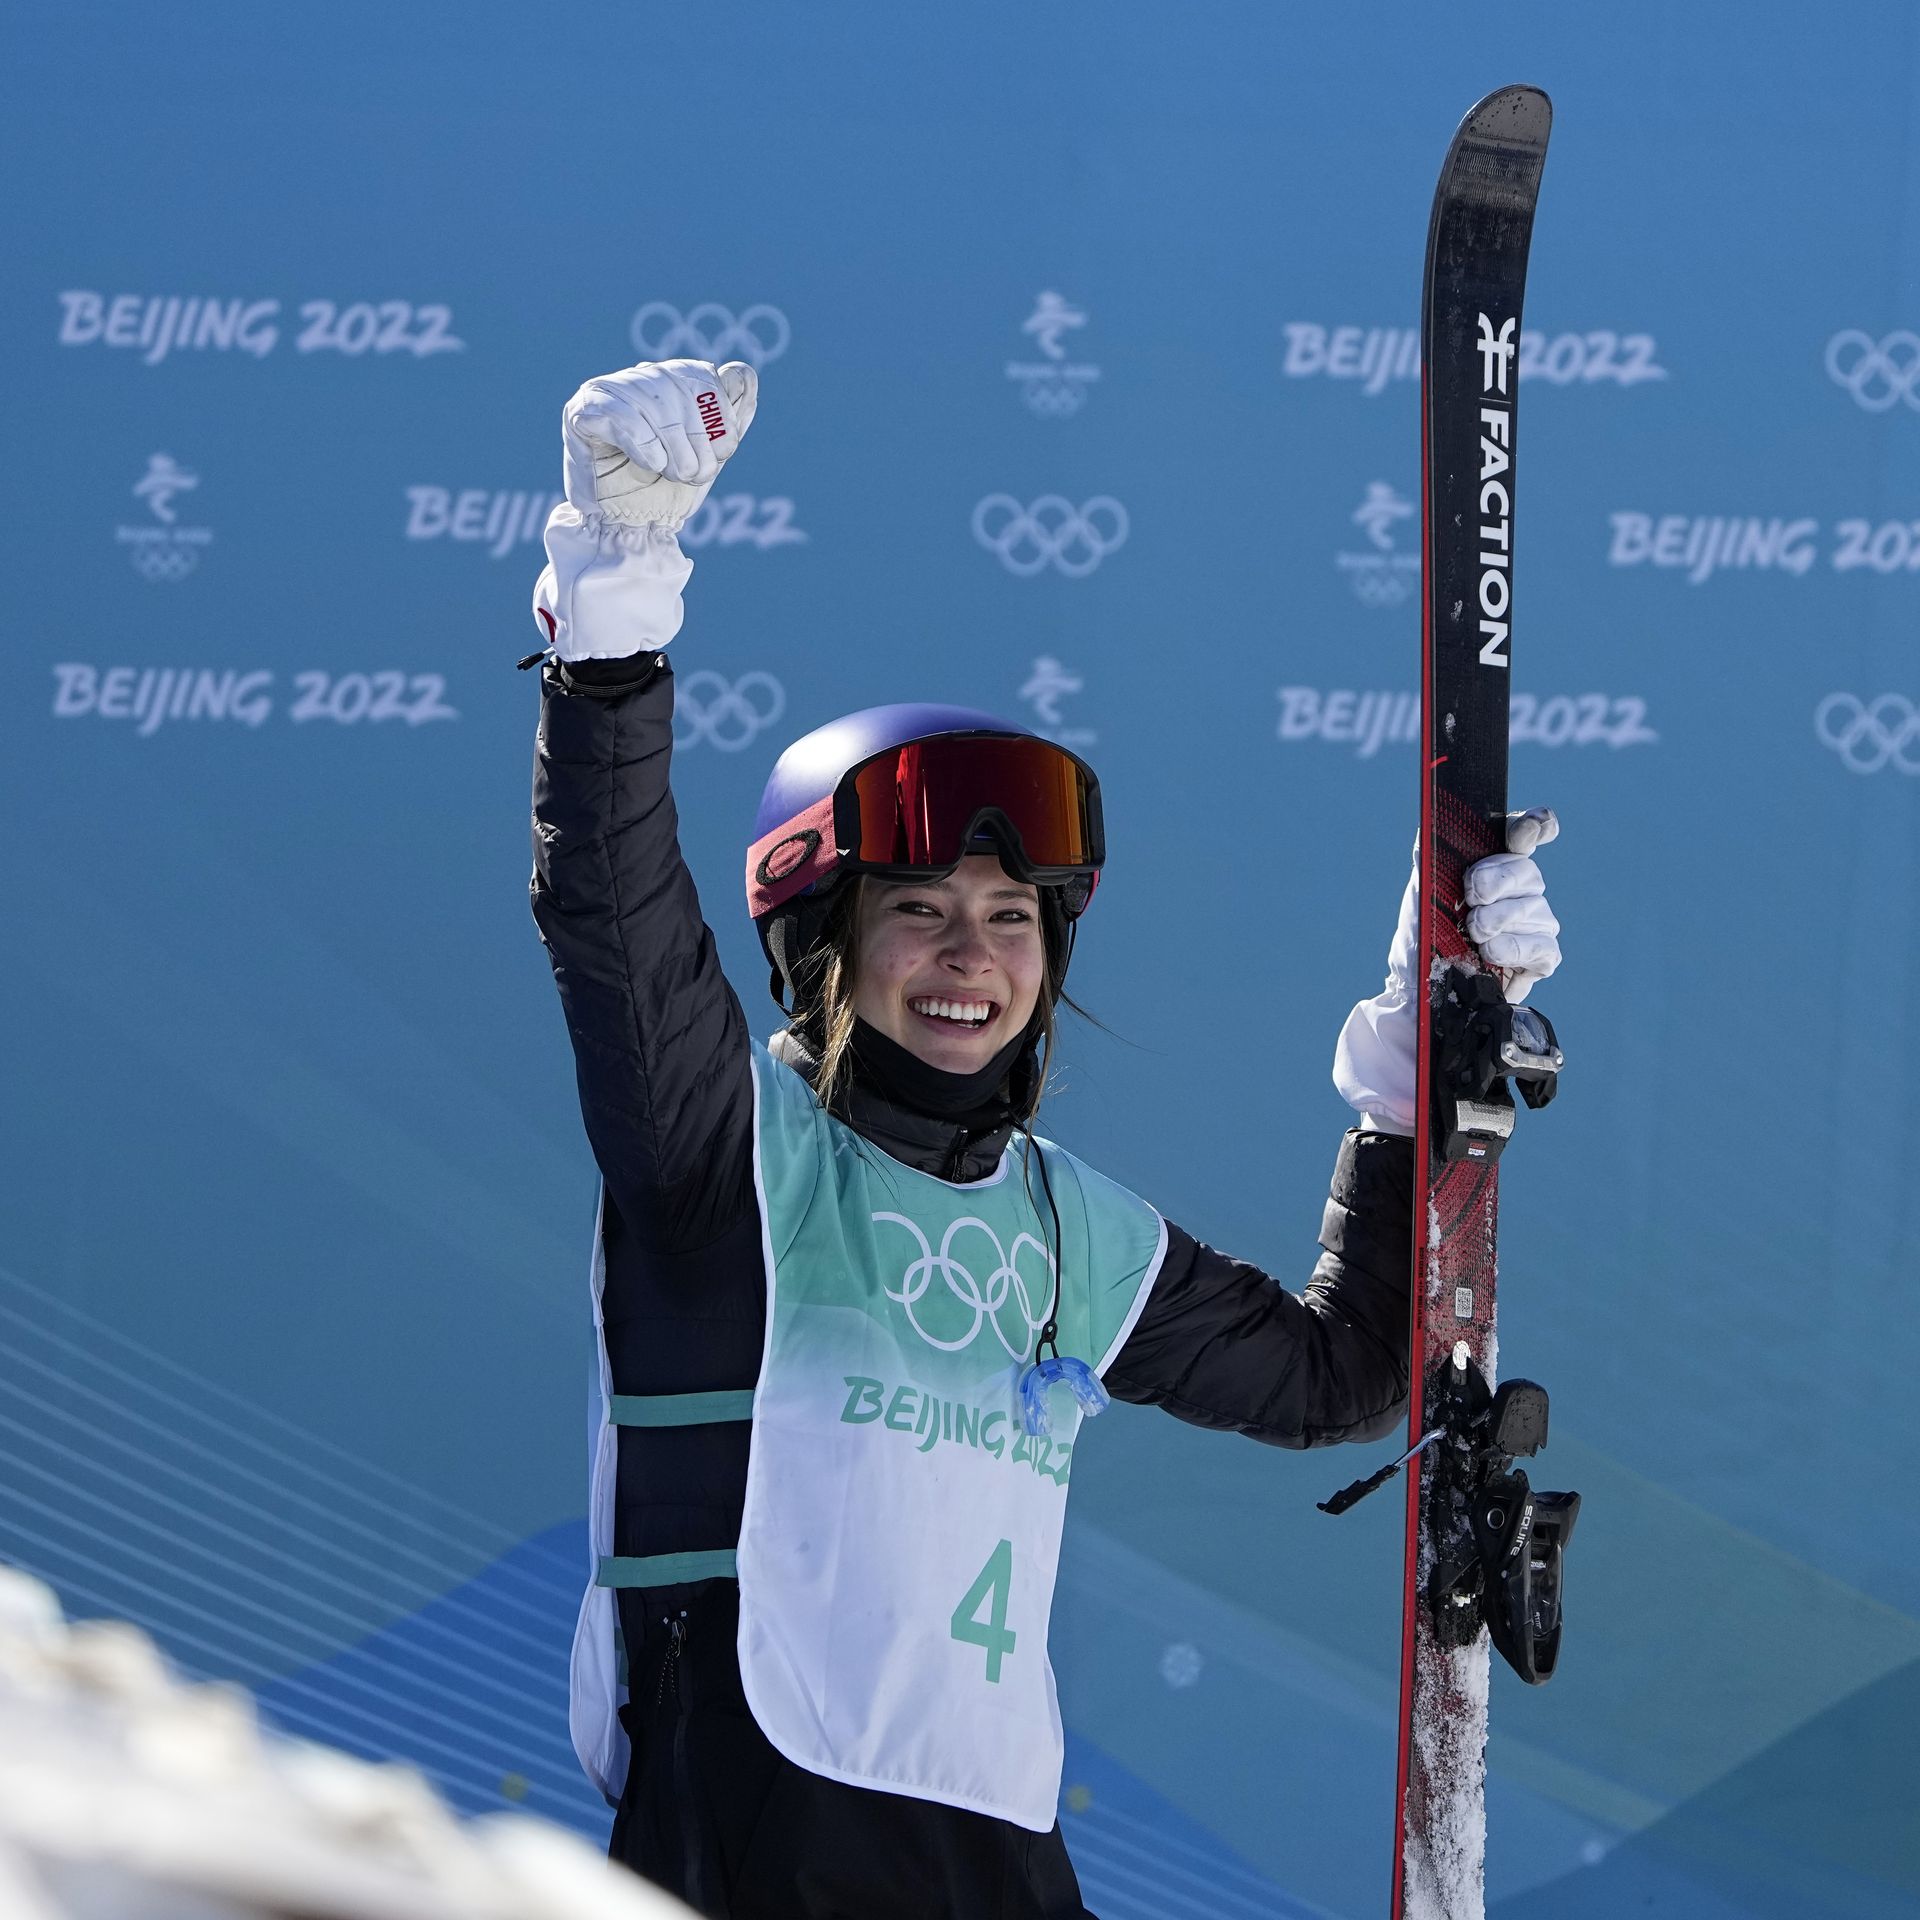 Winter Olympics 2022: Eileen Gu, who is she, how old, backstory